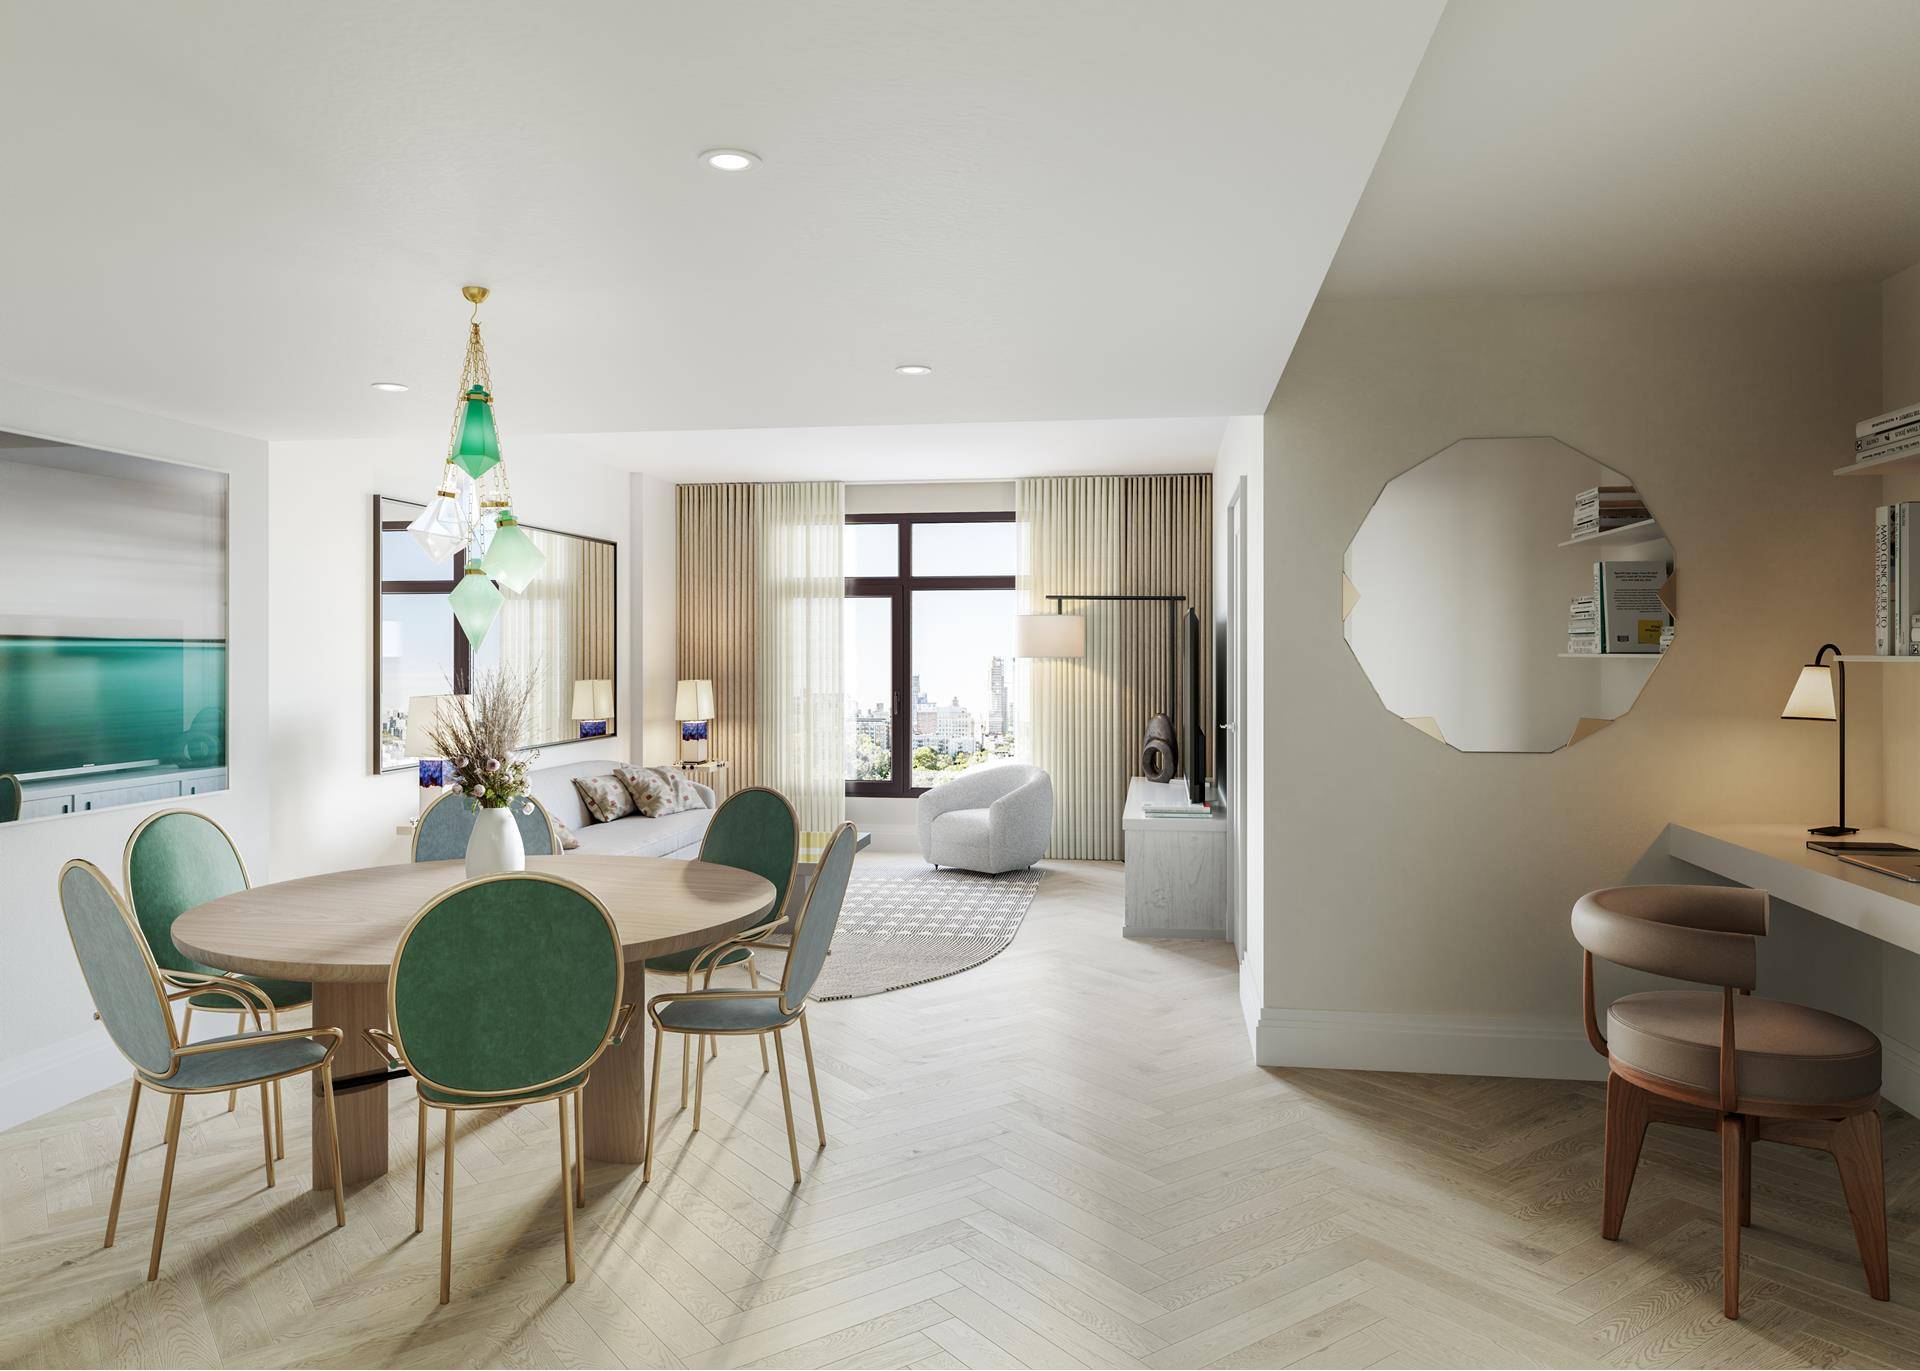 Sales Gallery Now Open By Appointment Introducing residence 9E at 300 West, an east facing studio offering an open concept living area that boasts custom White Oak herringbone flooring, central ...